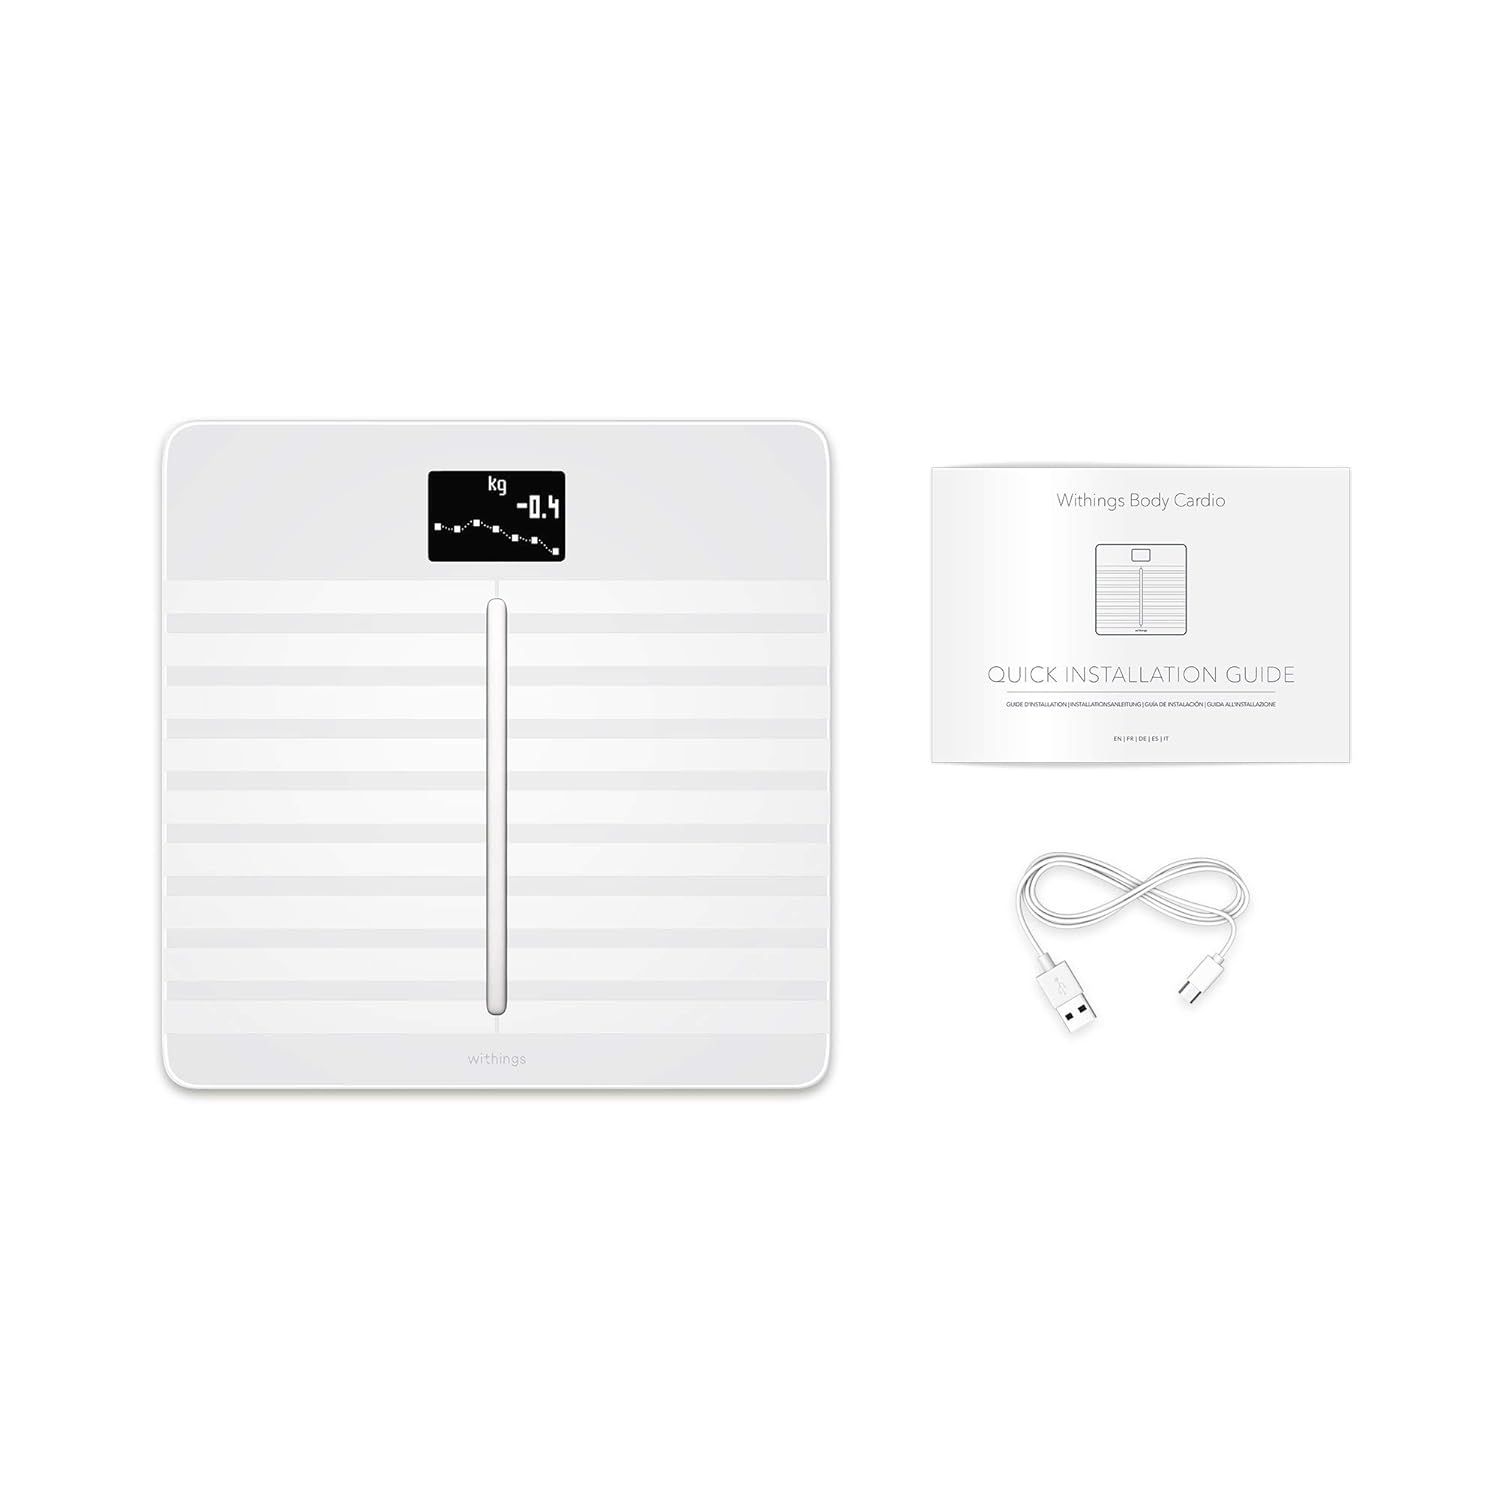 Nokia Withings Body Cardio Wi-Fi Smart Scale Body Composition WBS-04 WHITE